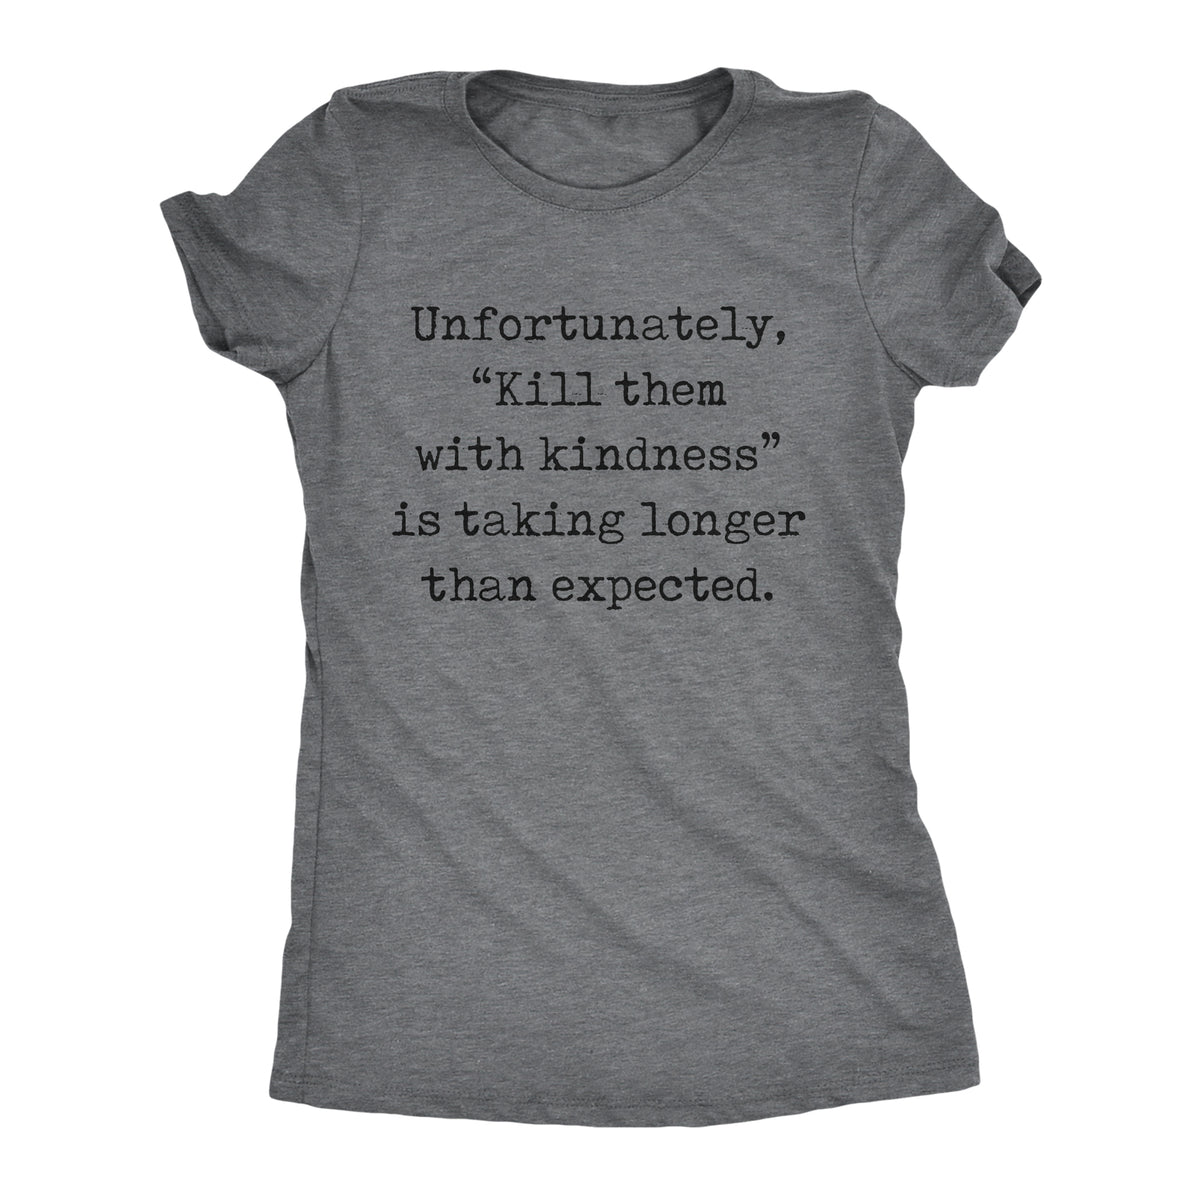 Funny Dark Heather Grey - KINDNESS Unfortunately Kill Them With Kindness Is Taking Longer Than Expected Womens T Shirt Nerdy sarcastic Tee